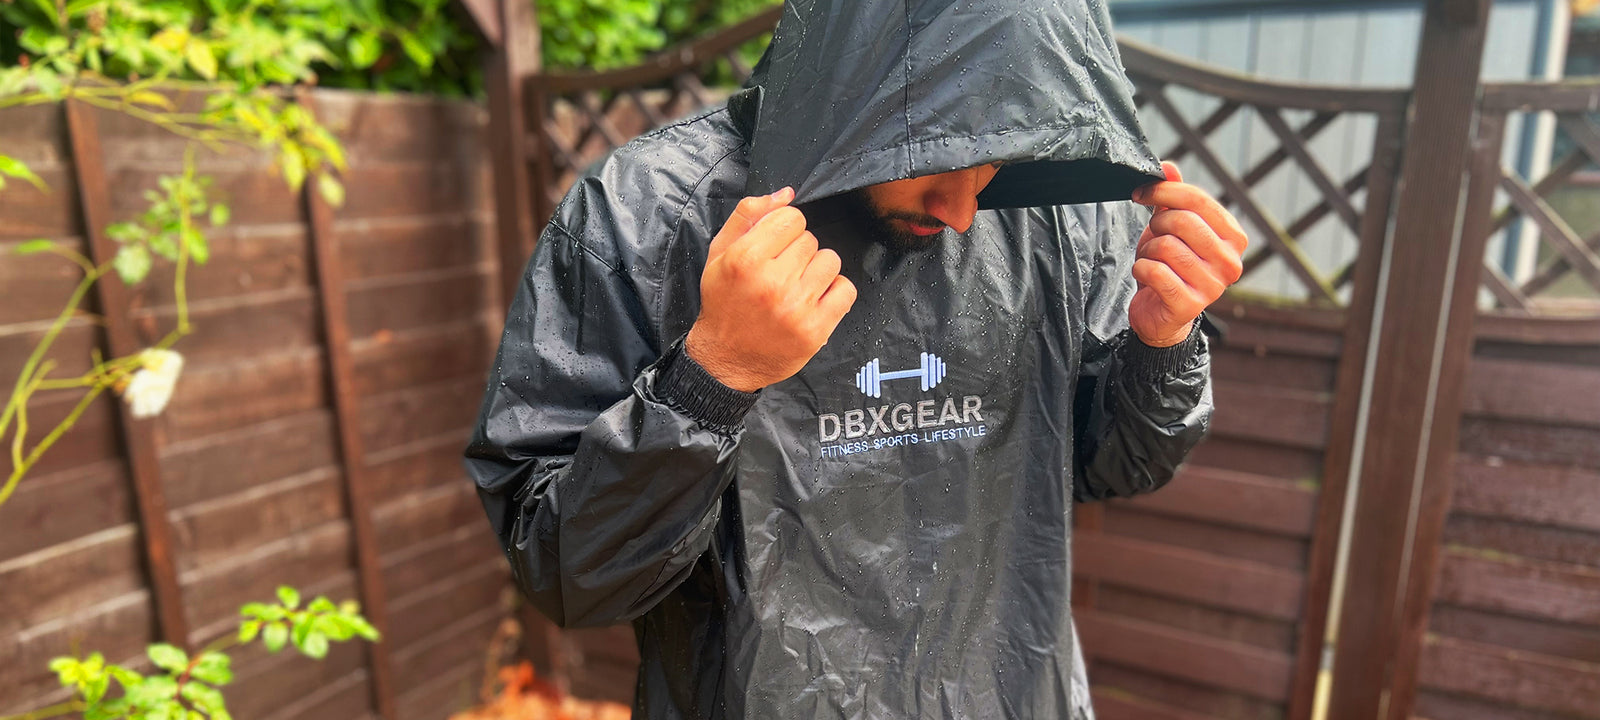 Top 4 Benefits Of Using Sauna Sweat Suits For Boxing & MMA Workouts –  DBXGEAR